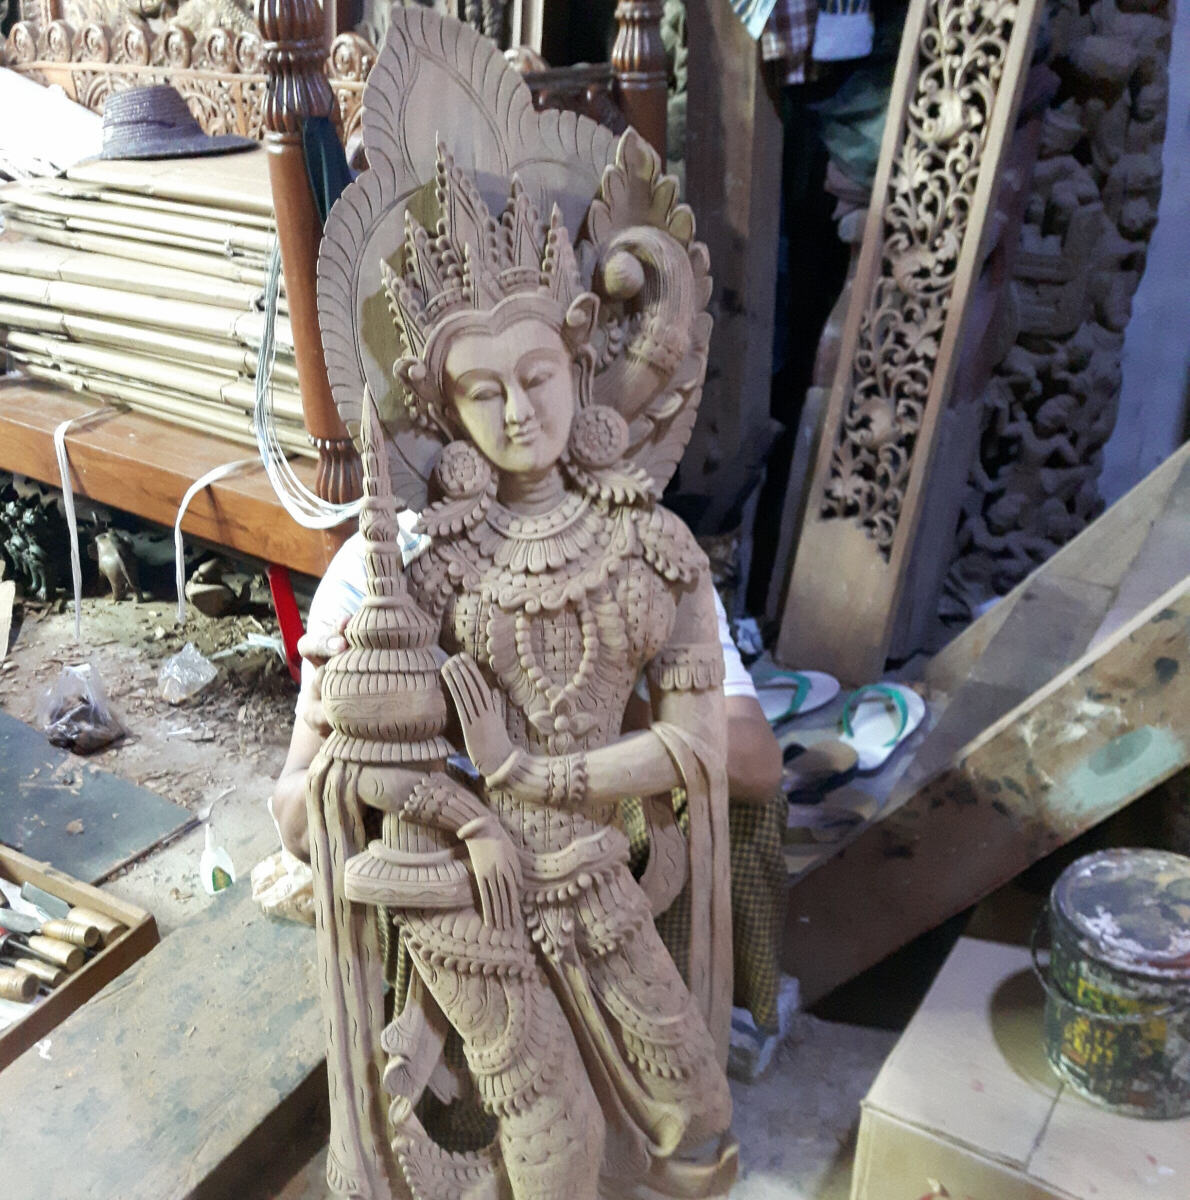 A woodcarving workshop in Mandalay